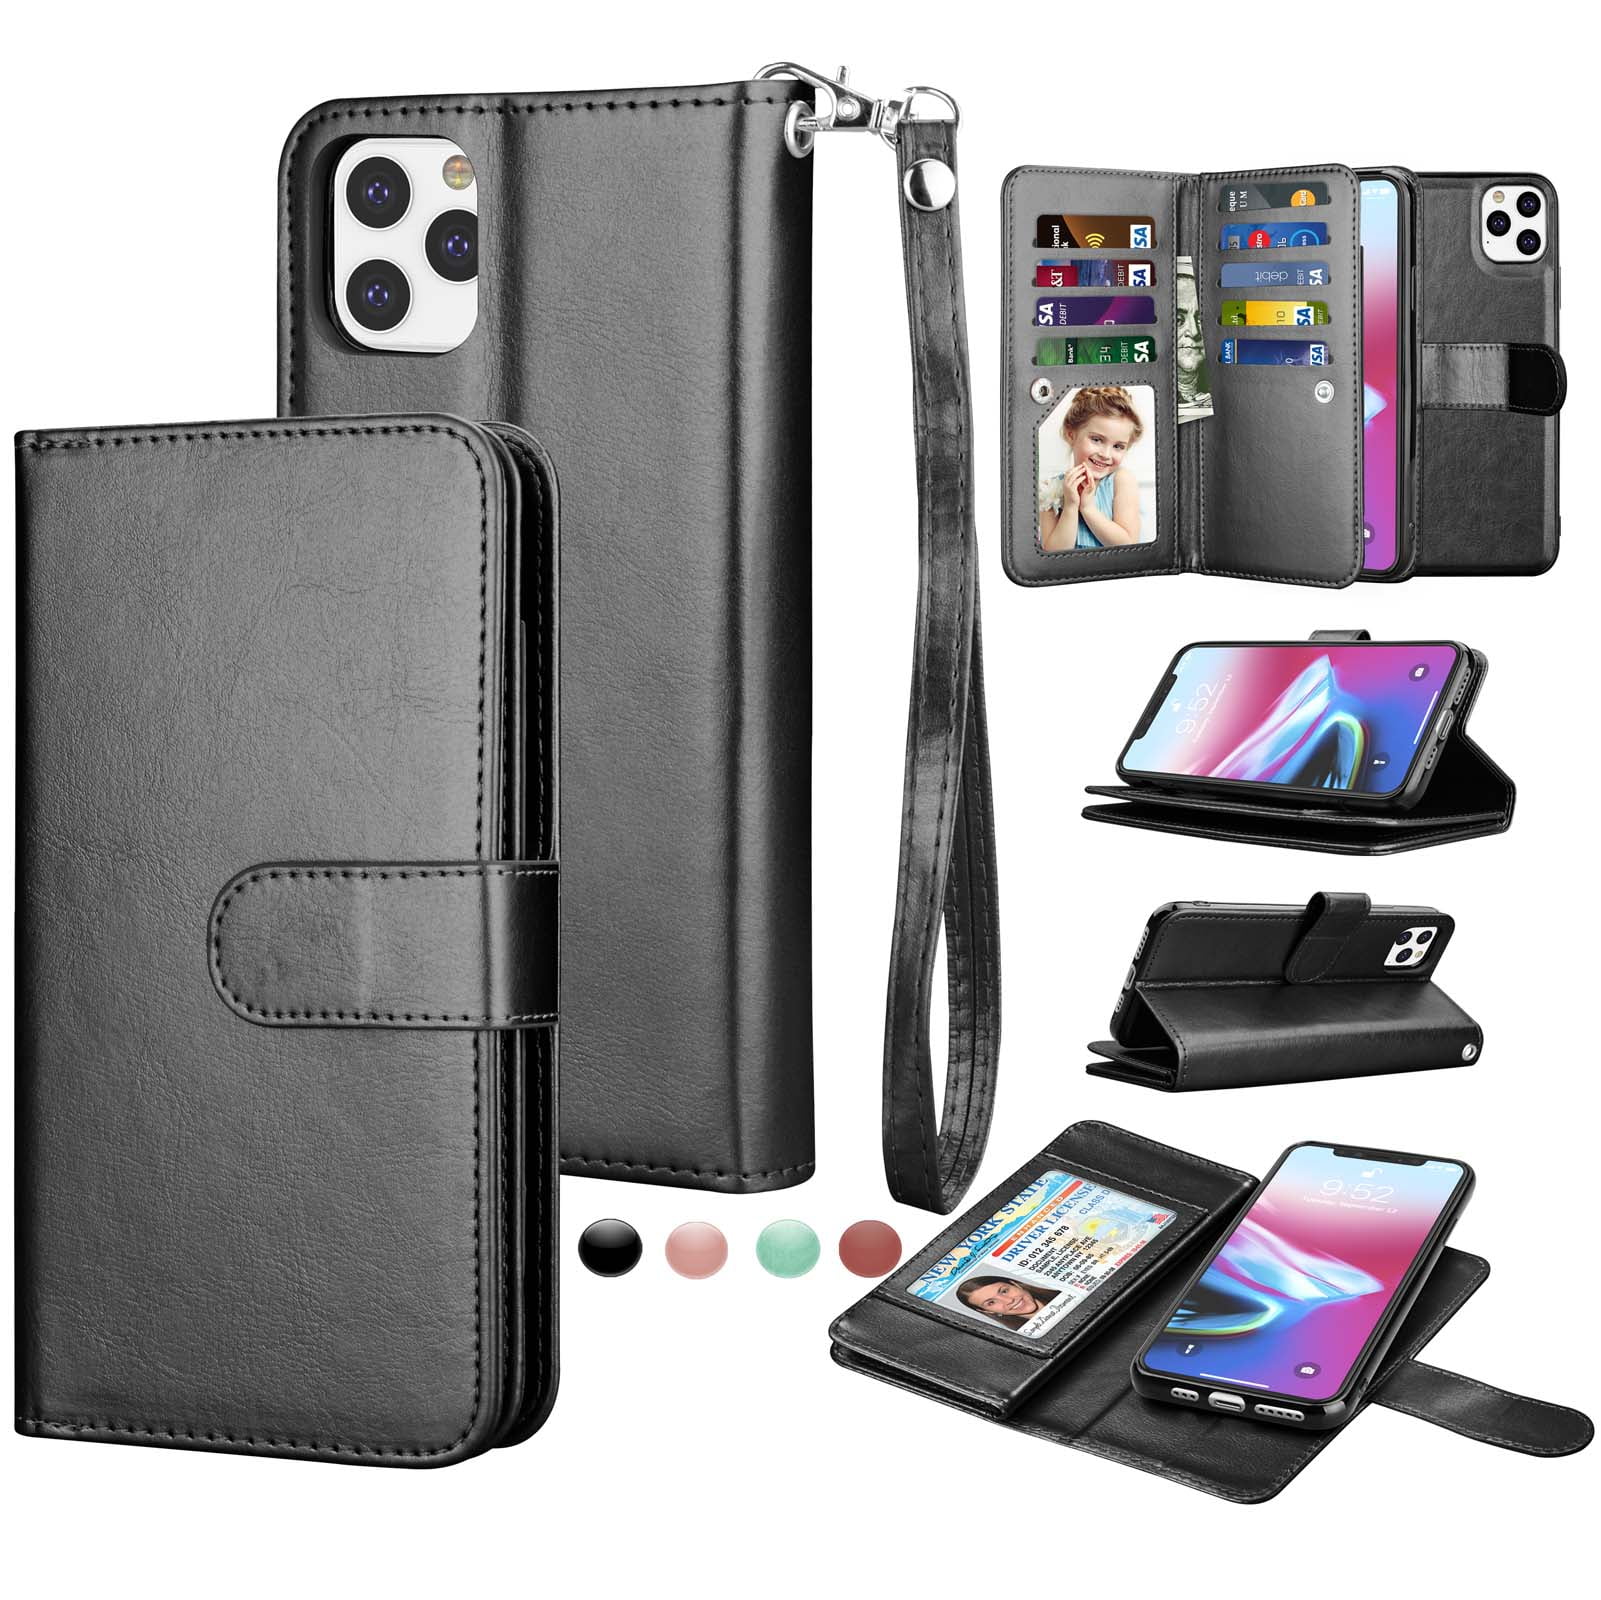 Stylish Cover Compatible with iPhone 11 Pro Black Leather Flip Case Wallet for iPhone 11 Pro 